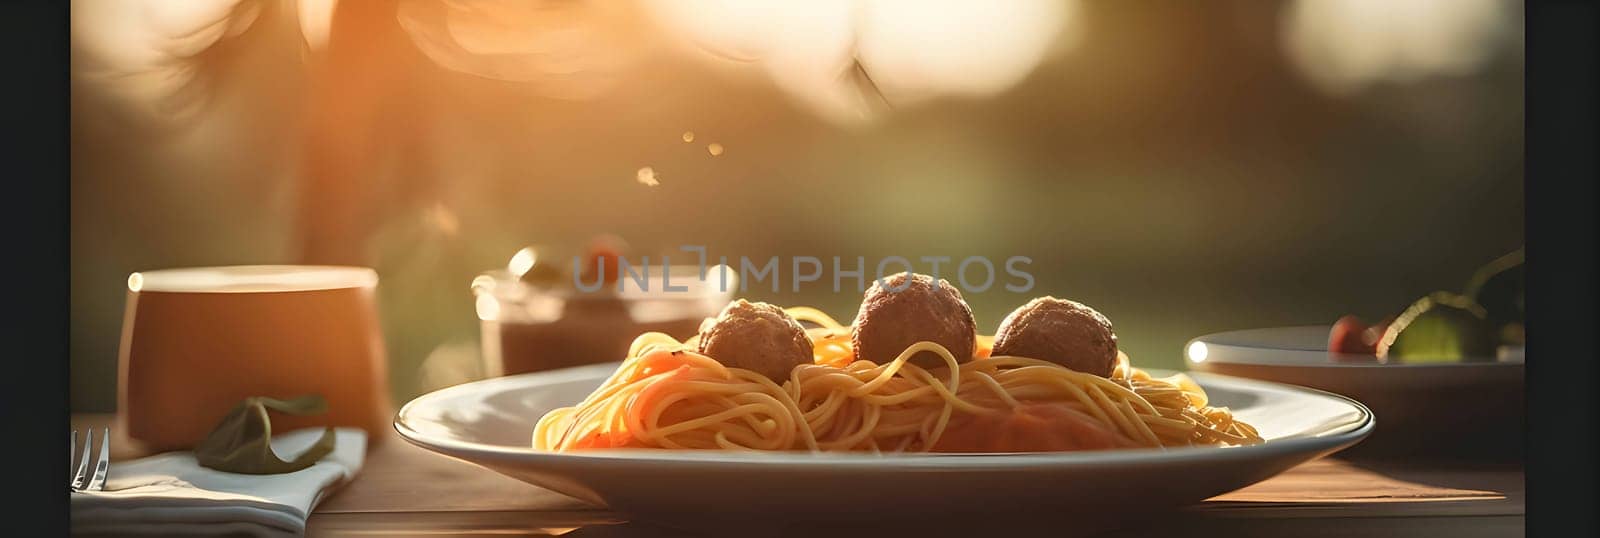 A plate of pasta and pulps on a wooden table top, close-up photo. by ThemesS